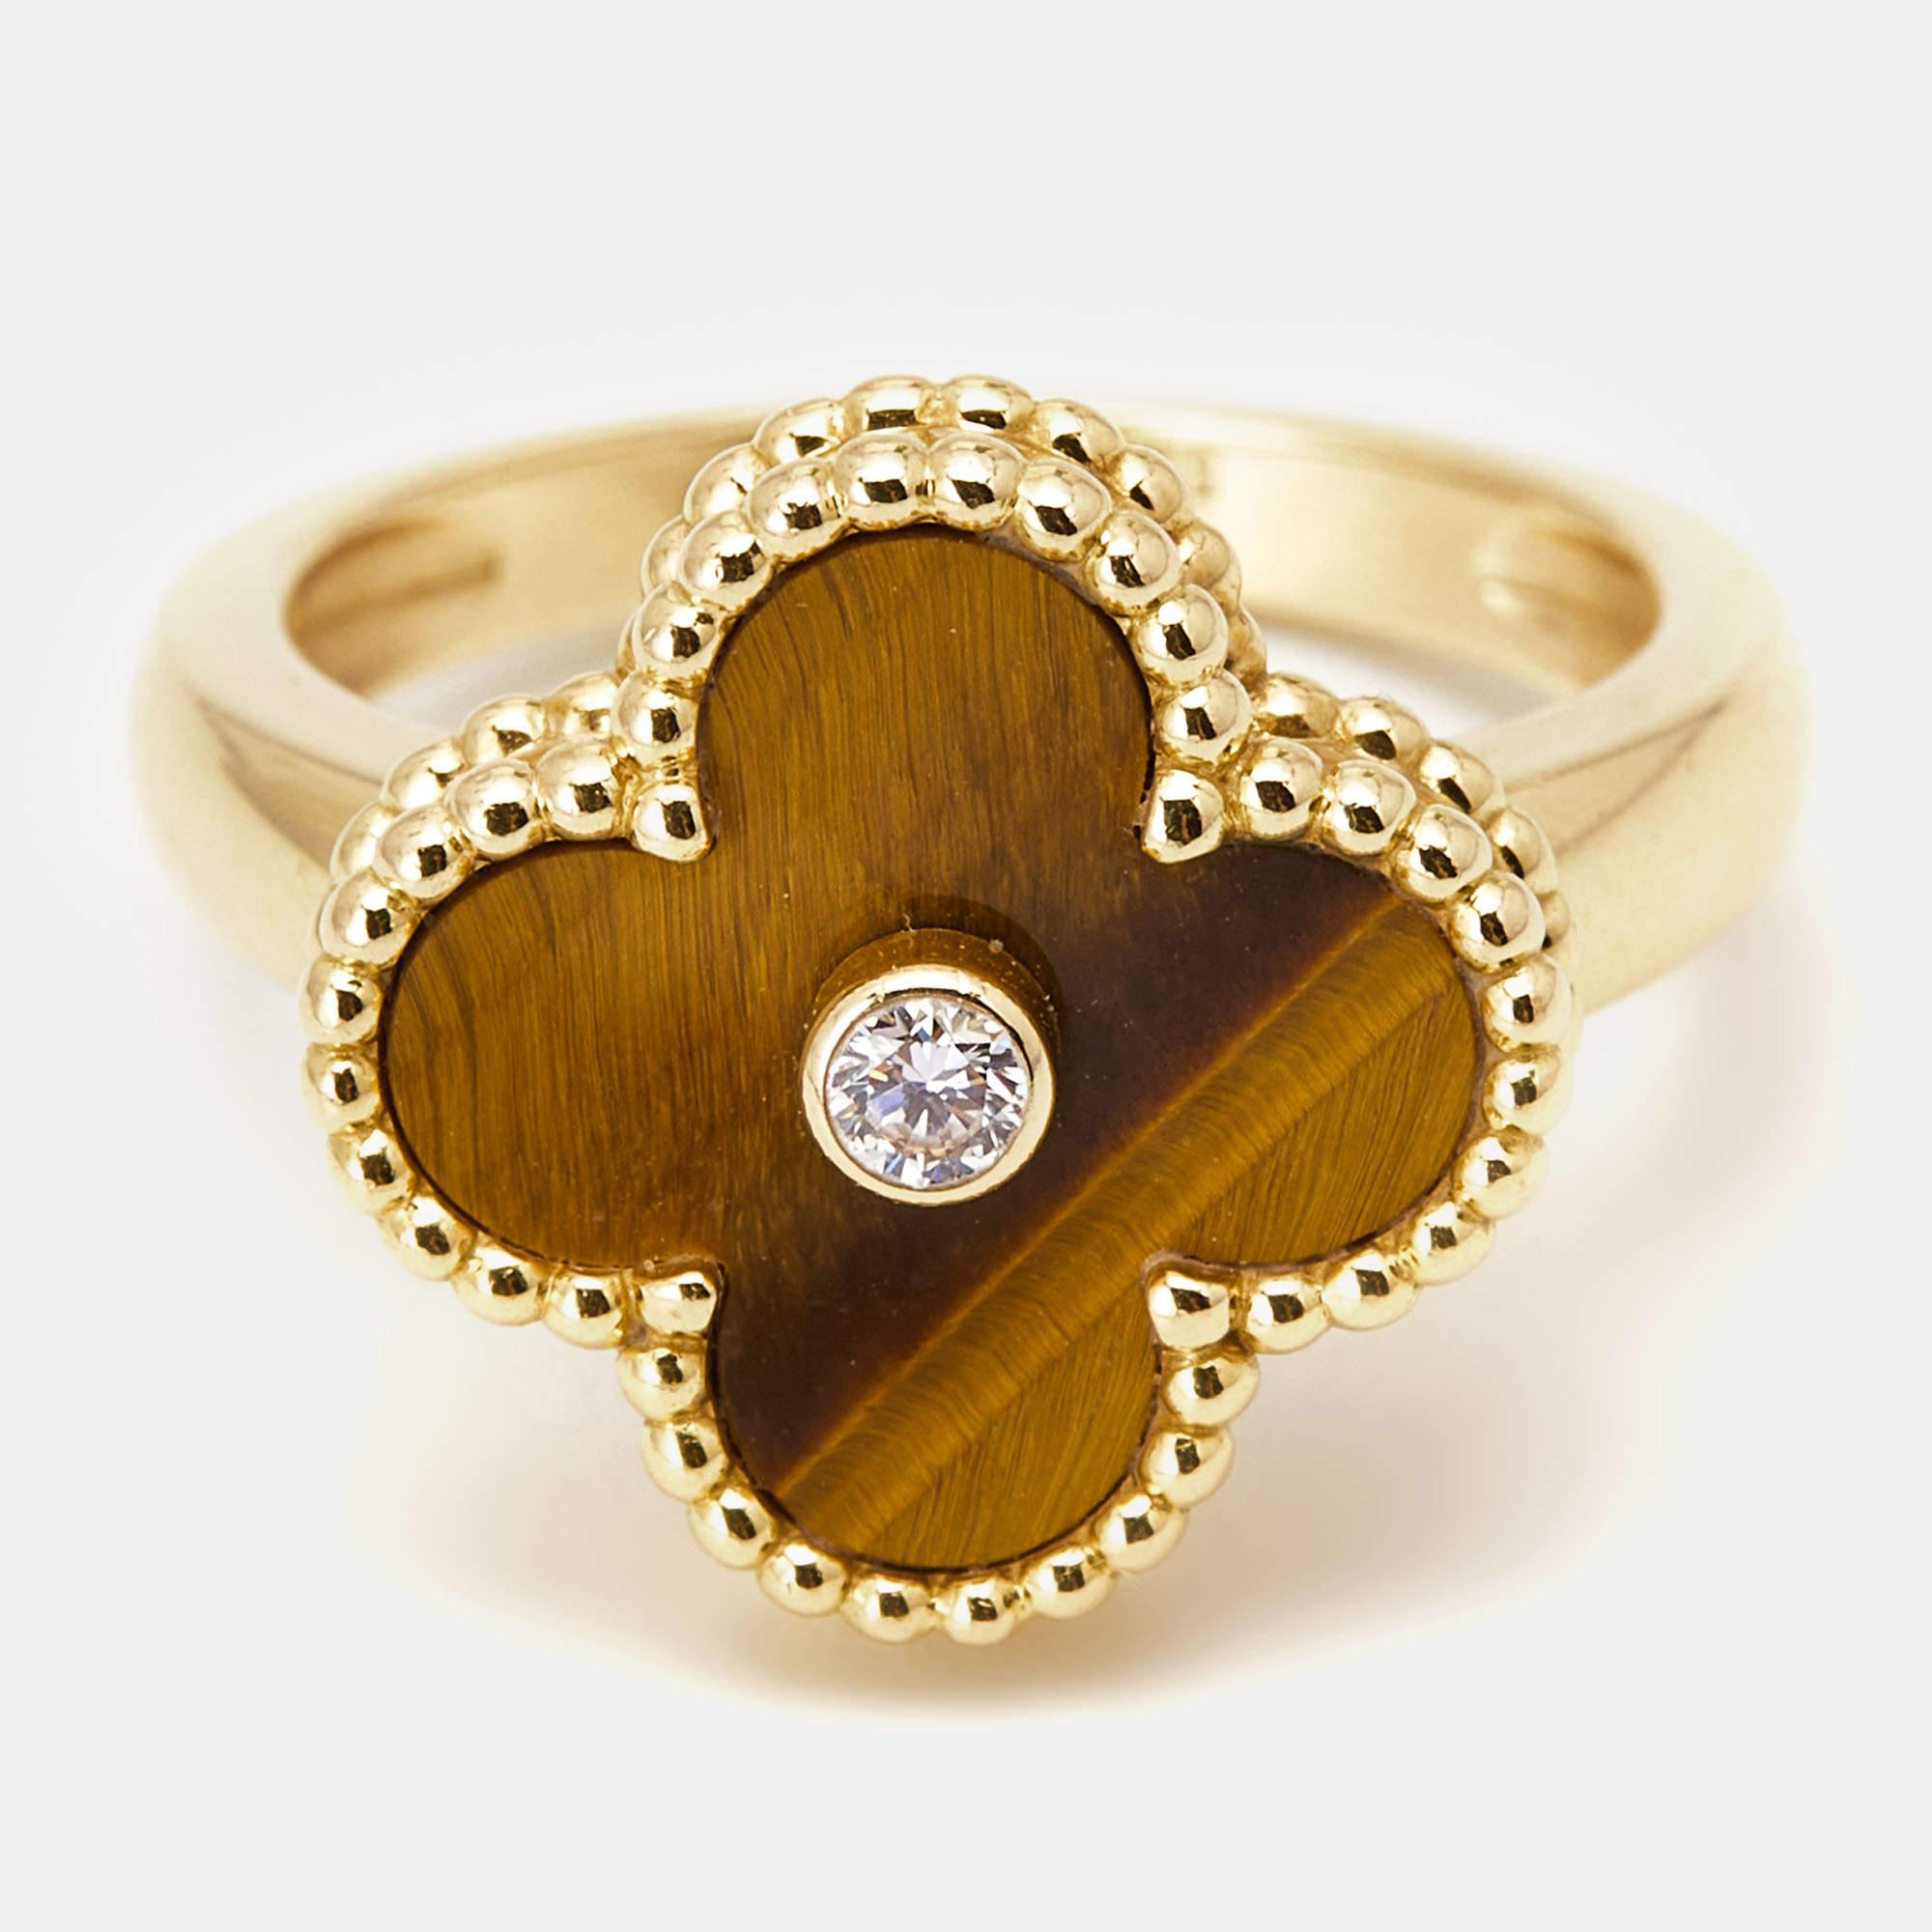 Crafted by Van Cleef & Arpels, the Vintage Alhambra ring exudes timeless charm. A mesmerizing Tiger's Eye gemstone sits gracefully amidst delicate 18k gold beading, accented by a radiant diamond. With an air of refinement, this ring is a testament